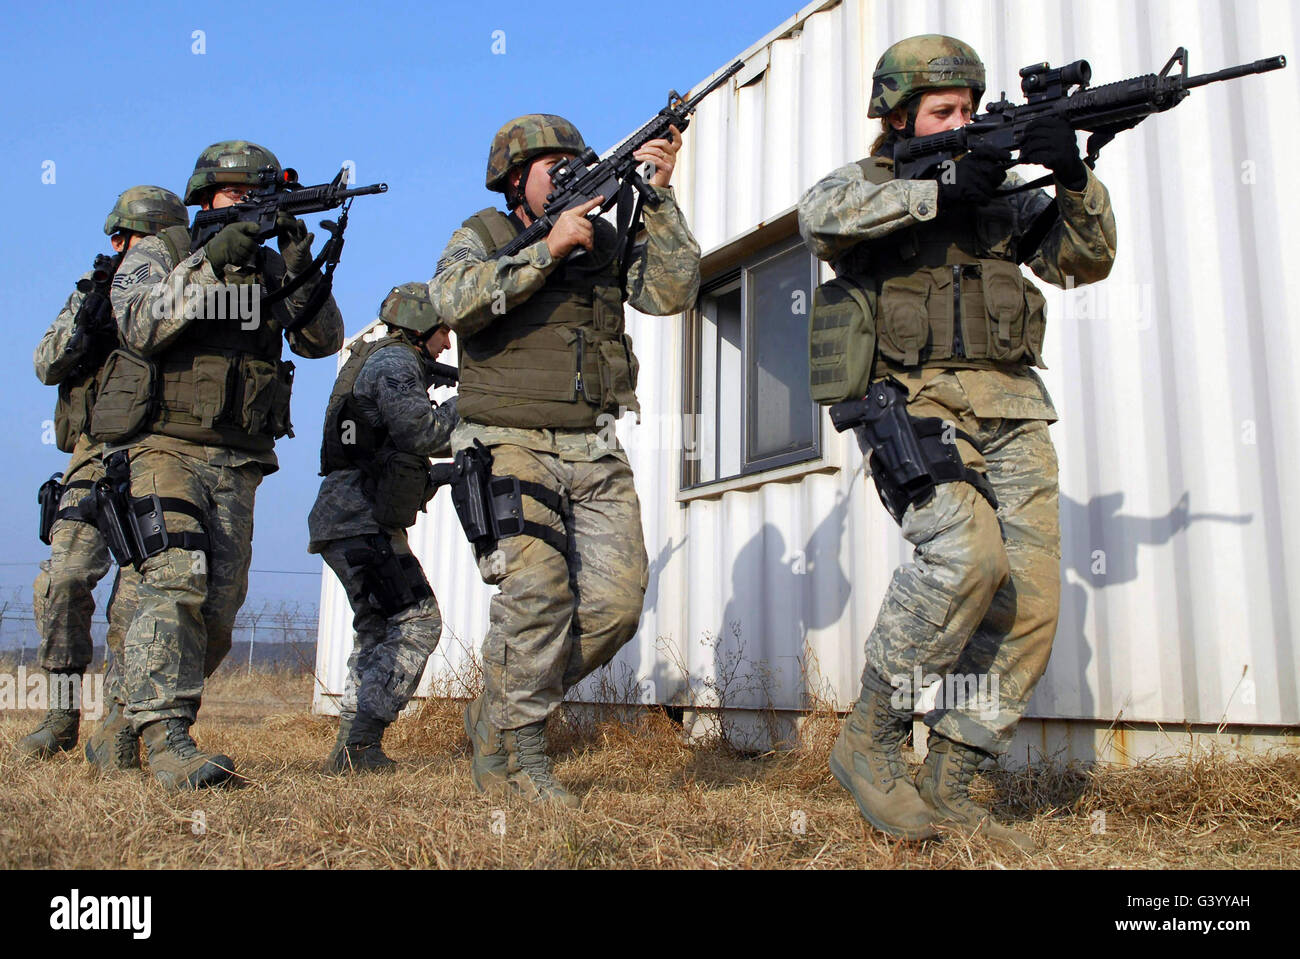 Soldiers participate in training exercises. Stock Photo